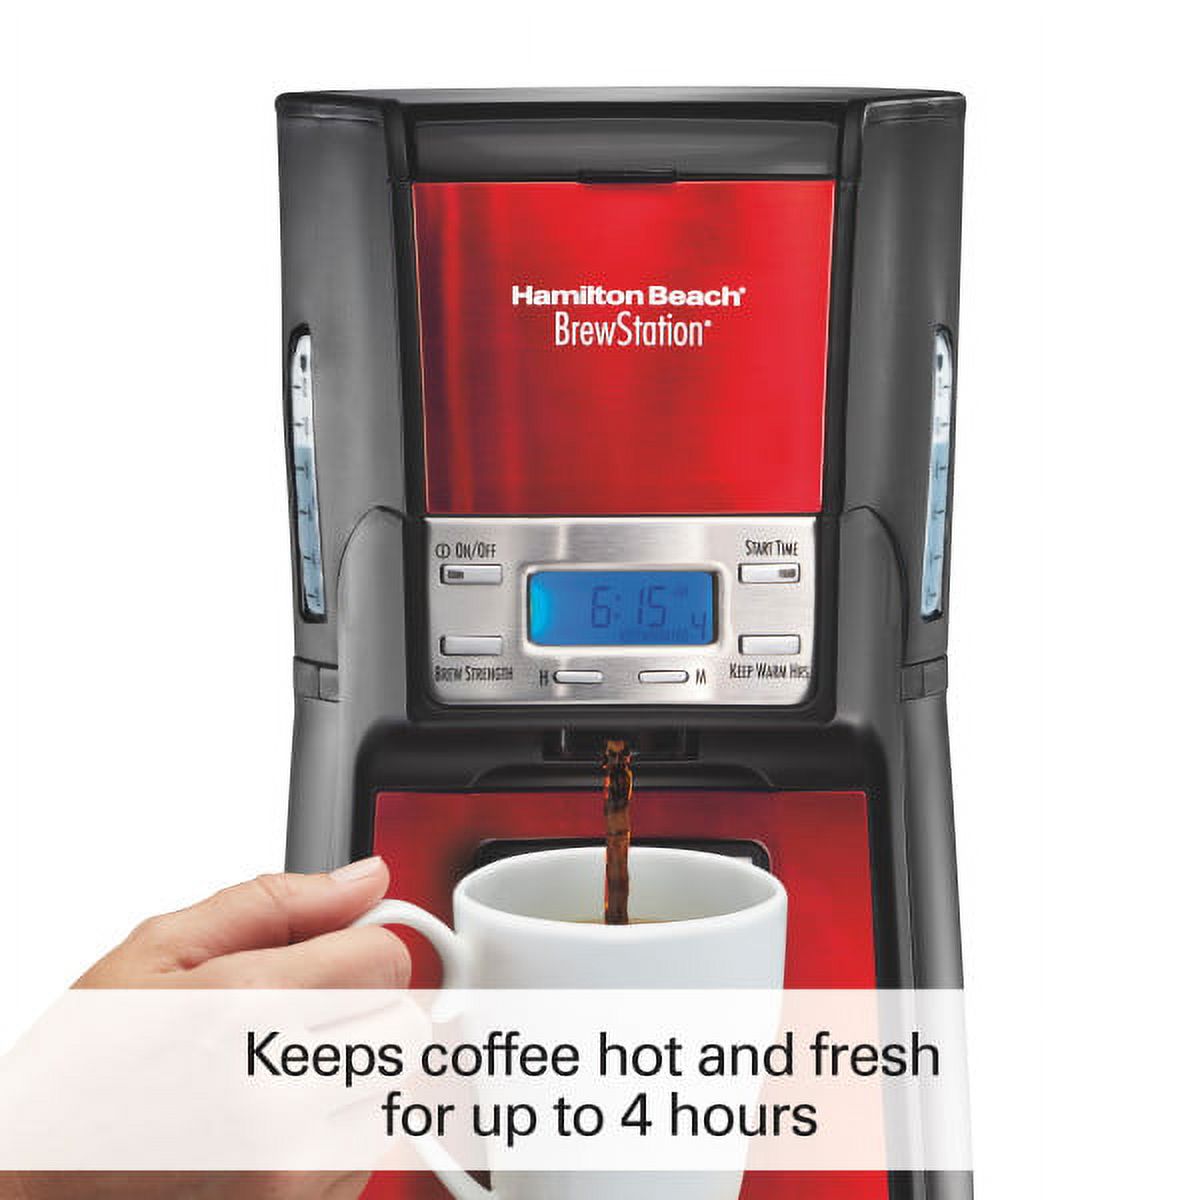 Hamilton Beach Brew Station 12 Cup Dispensing Coffeemaker, Red, 48466-MX: - image 2 of 8